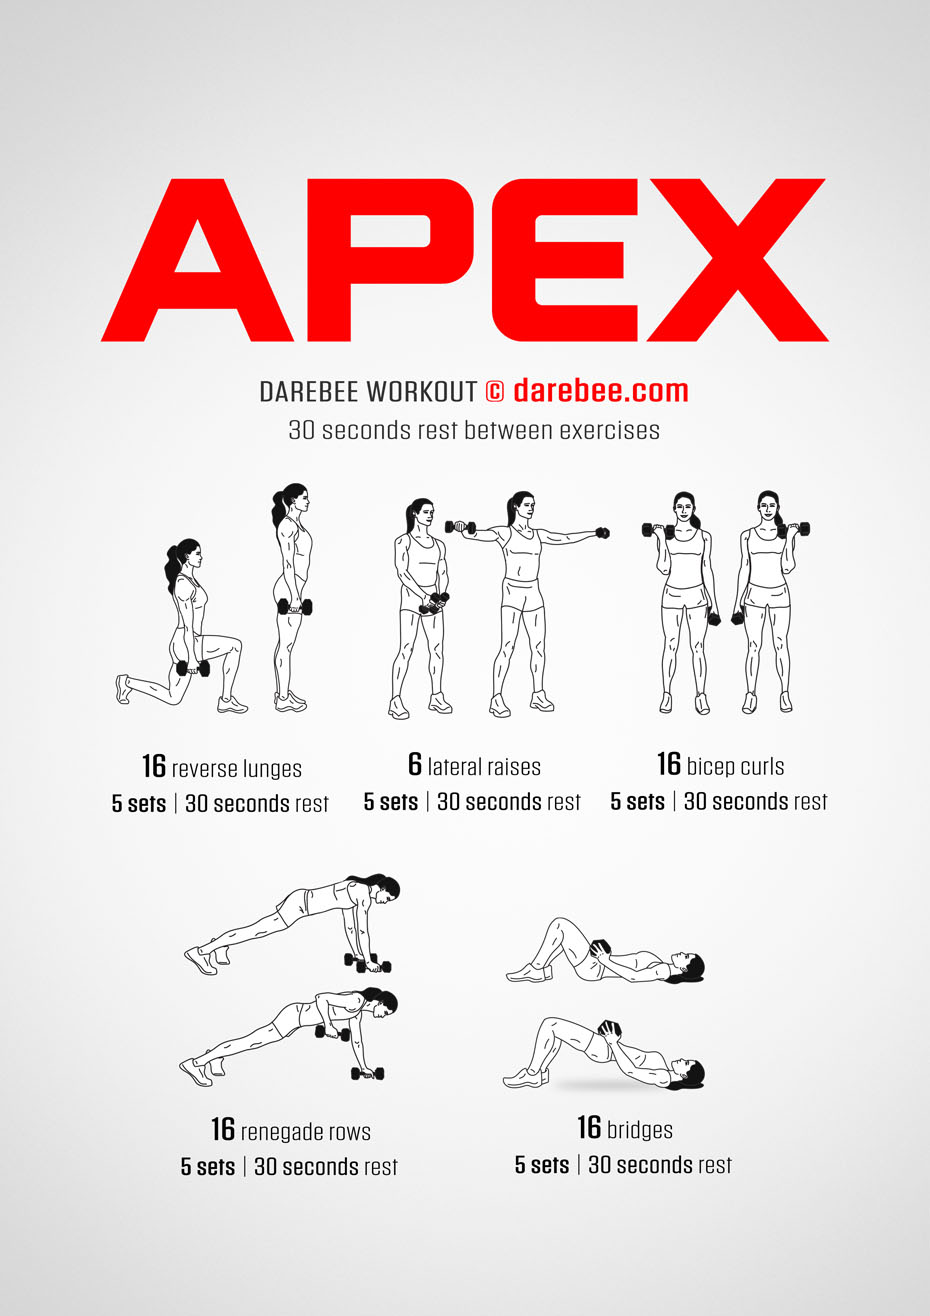 Apex is a DAREBEE home fitness dumbbells total body strength workout that helps you stay stronger and biologically younger as you age.